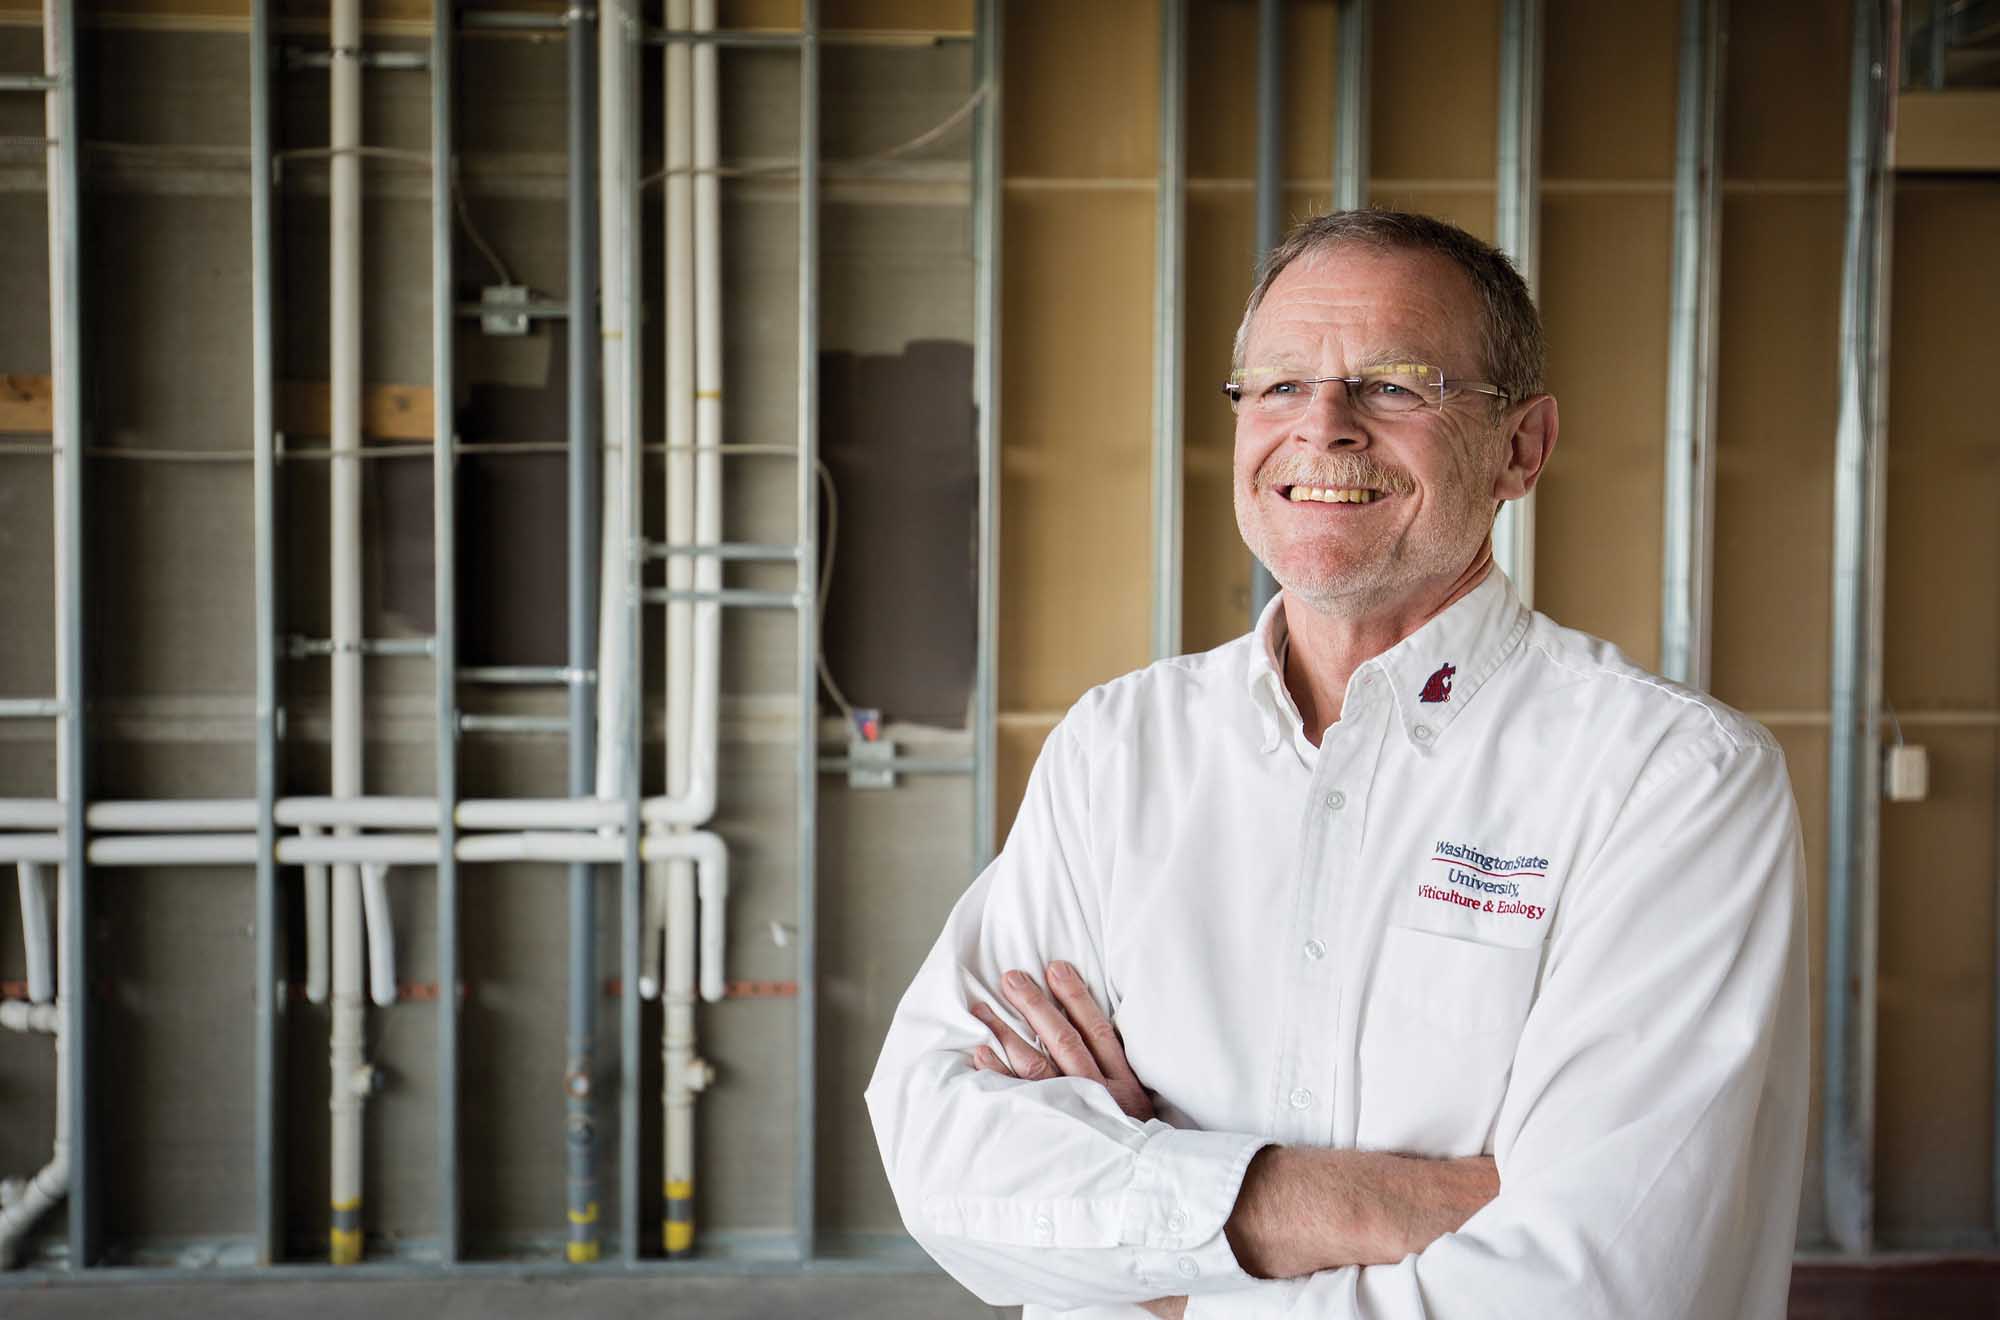 Thomas Henick-Kling on May 4, 2015 before the opening of the new Washington State University Wine Science Center in Richland, Washington. The center, located near the Tri-Cities campus of WSU, will be a hub for the Washington wine industry and bring together researchers, students, and industry members. (TJ Mullinax/Good Fruit Grower)